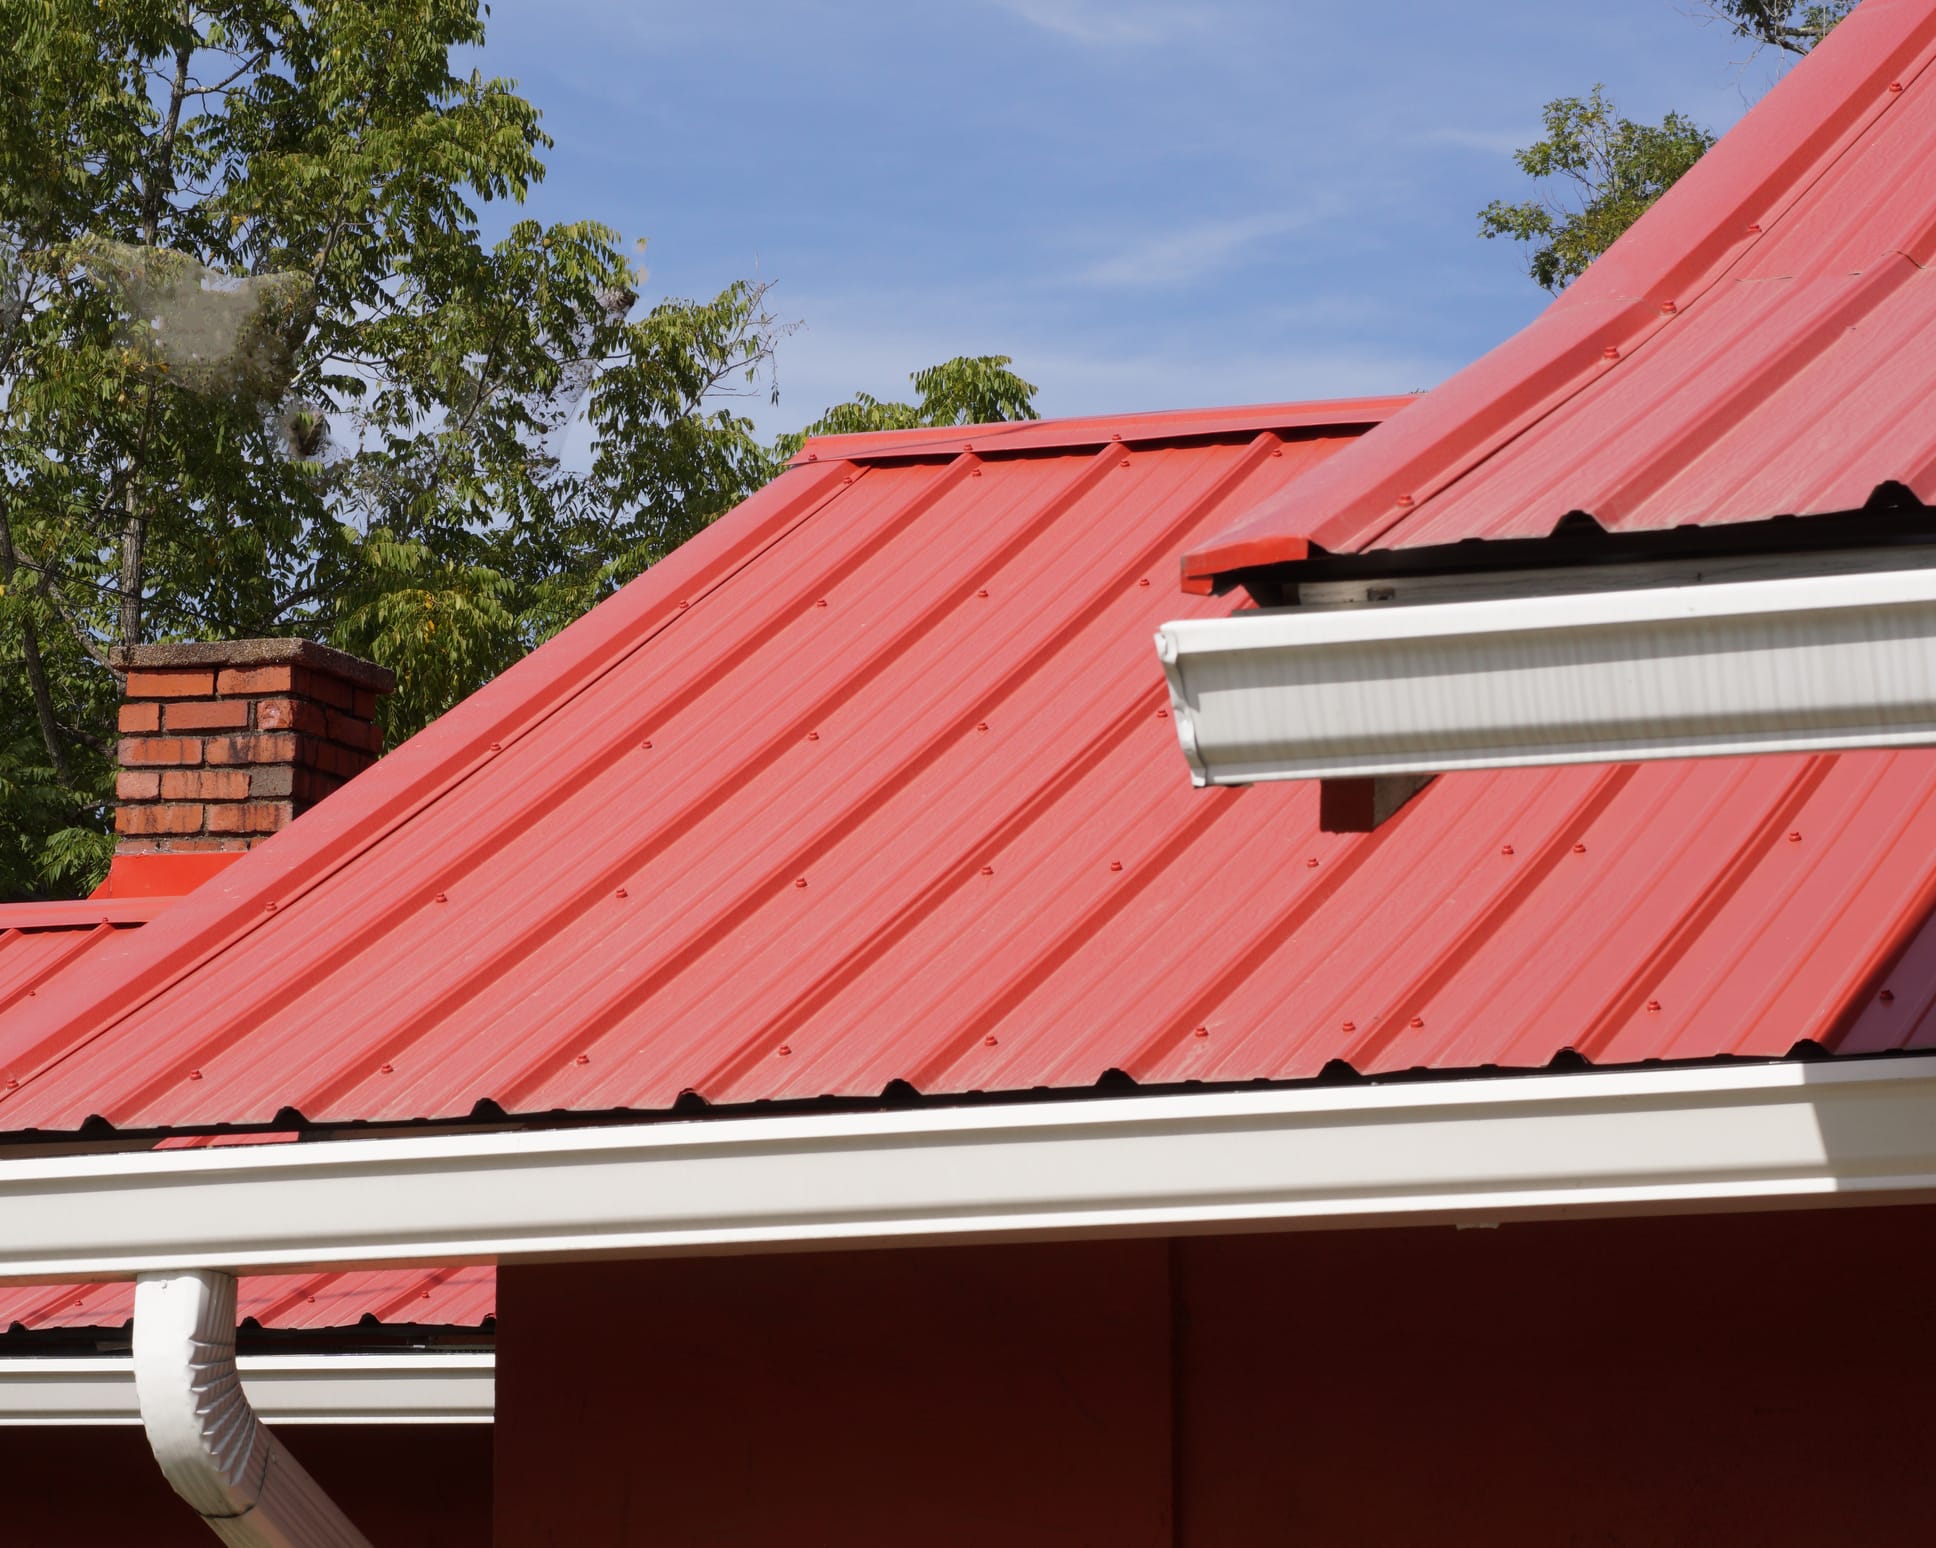 Can You Paint A Metal Roof Rather Than Replace It? - Piedmont Roofing